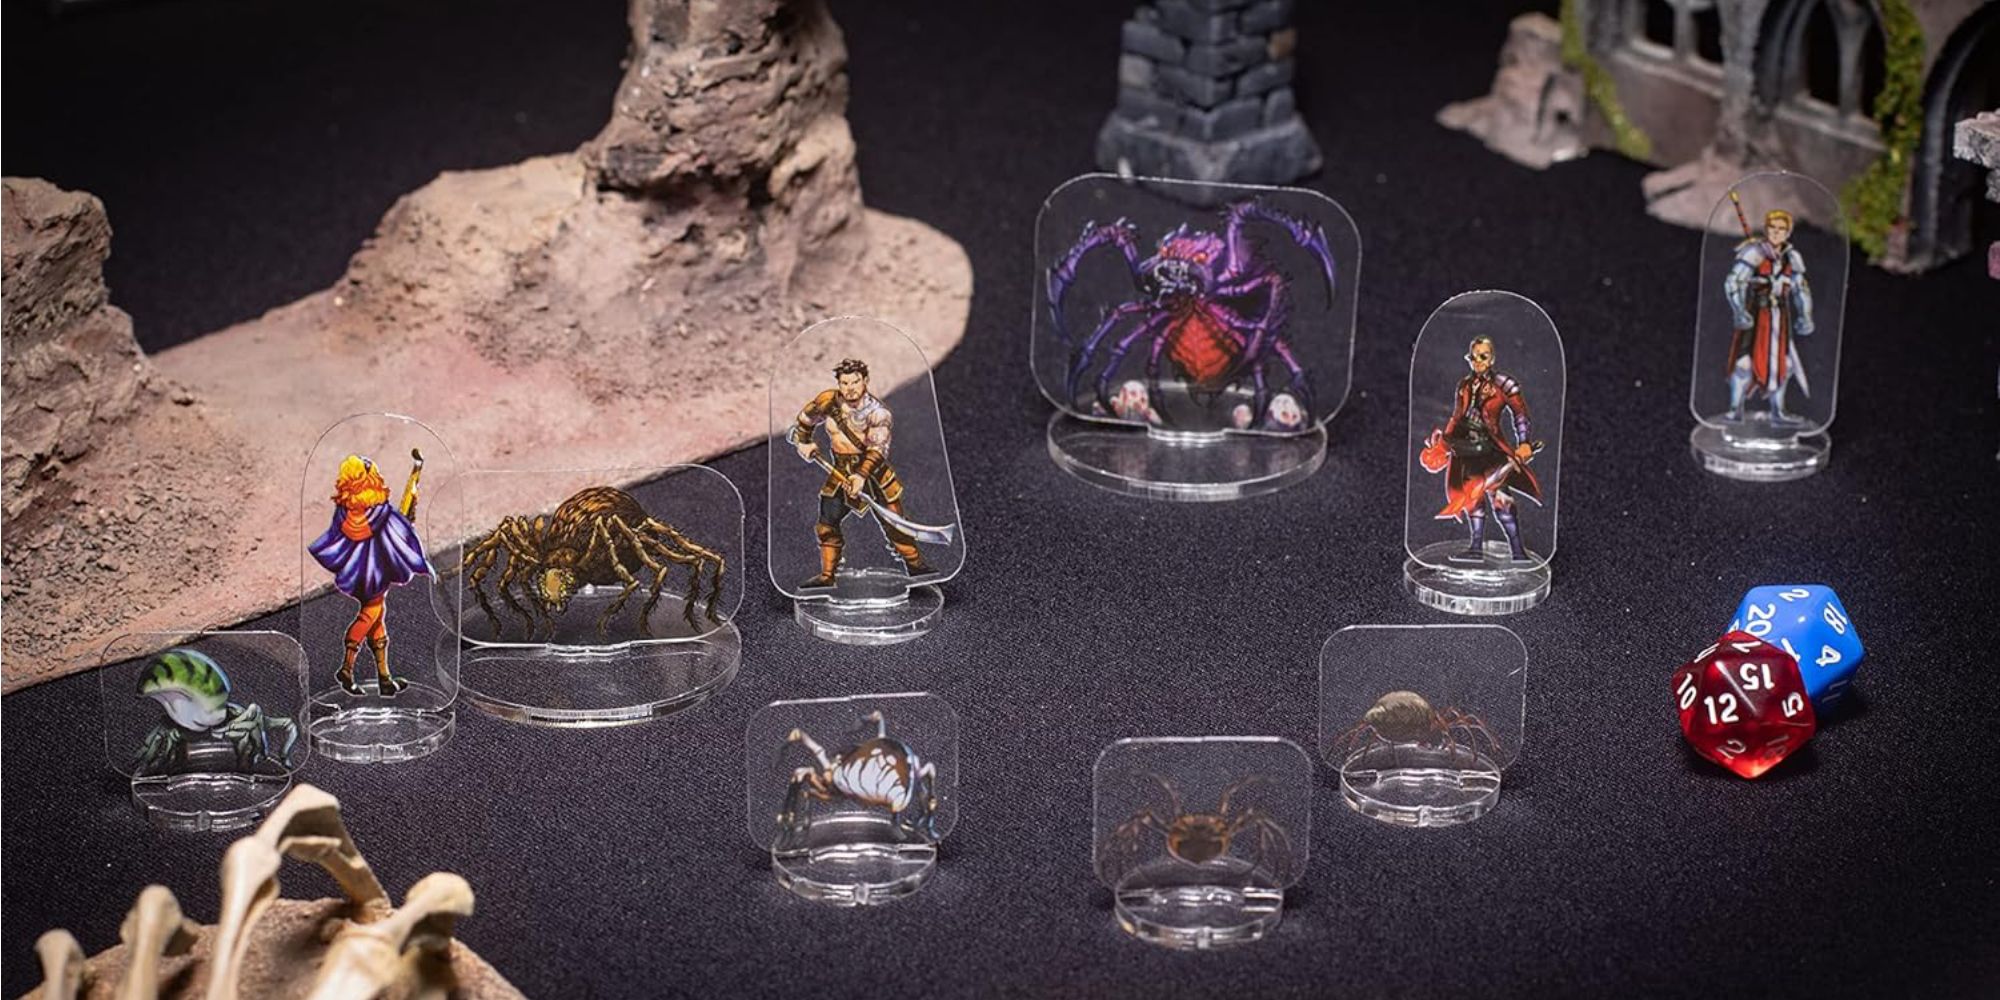 A photo of ArcKnight miniatures on a gaming table, including adventurers and arachnid monsters.